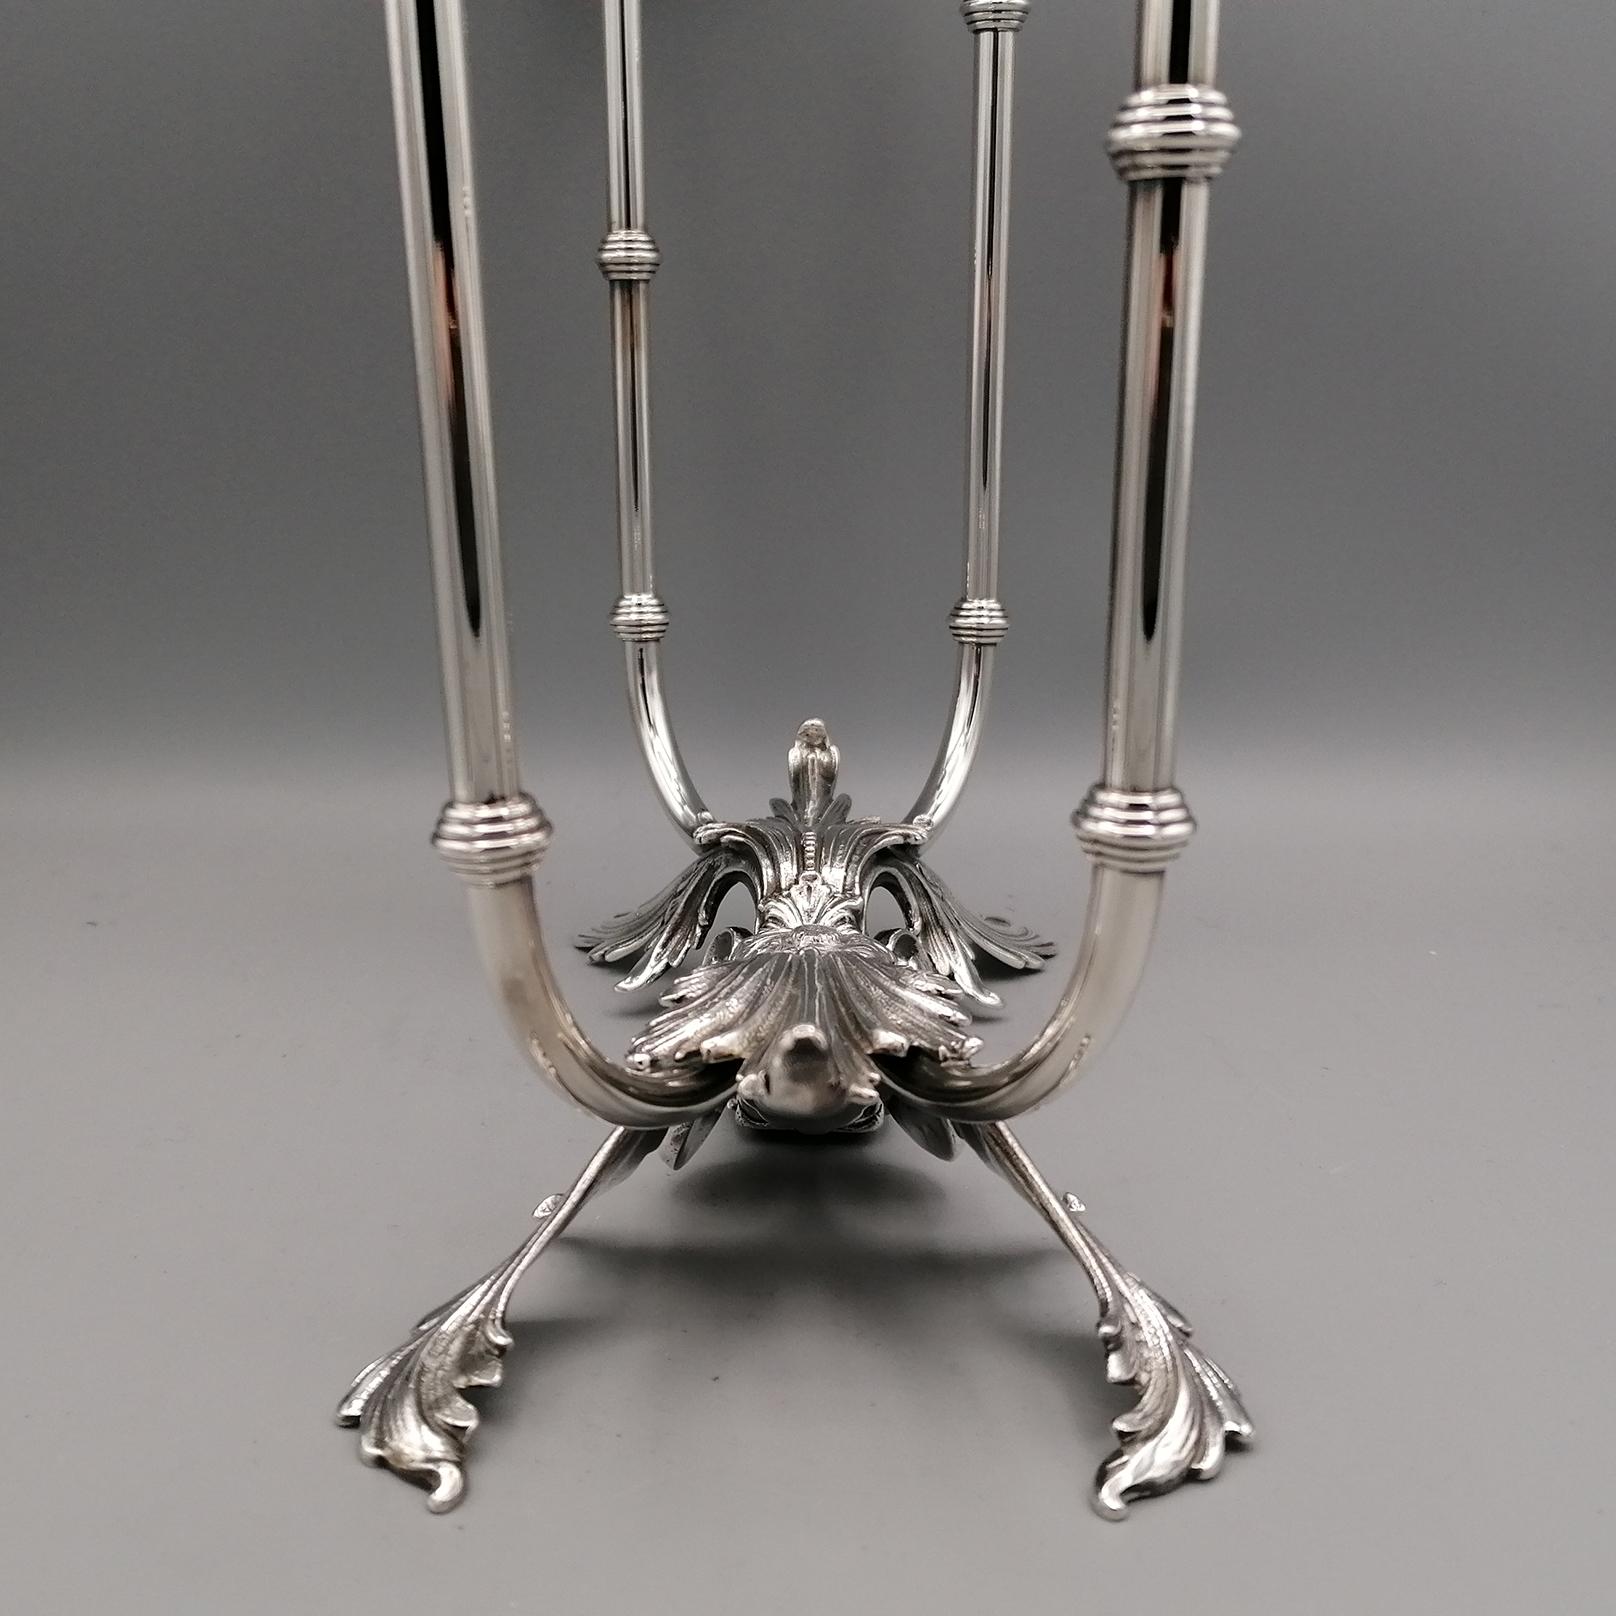 21th Century Italian Sterling Silver 4 Lights Candelabra  For Sale 2